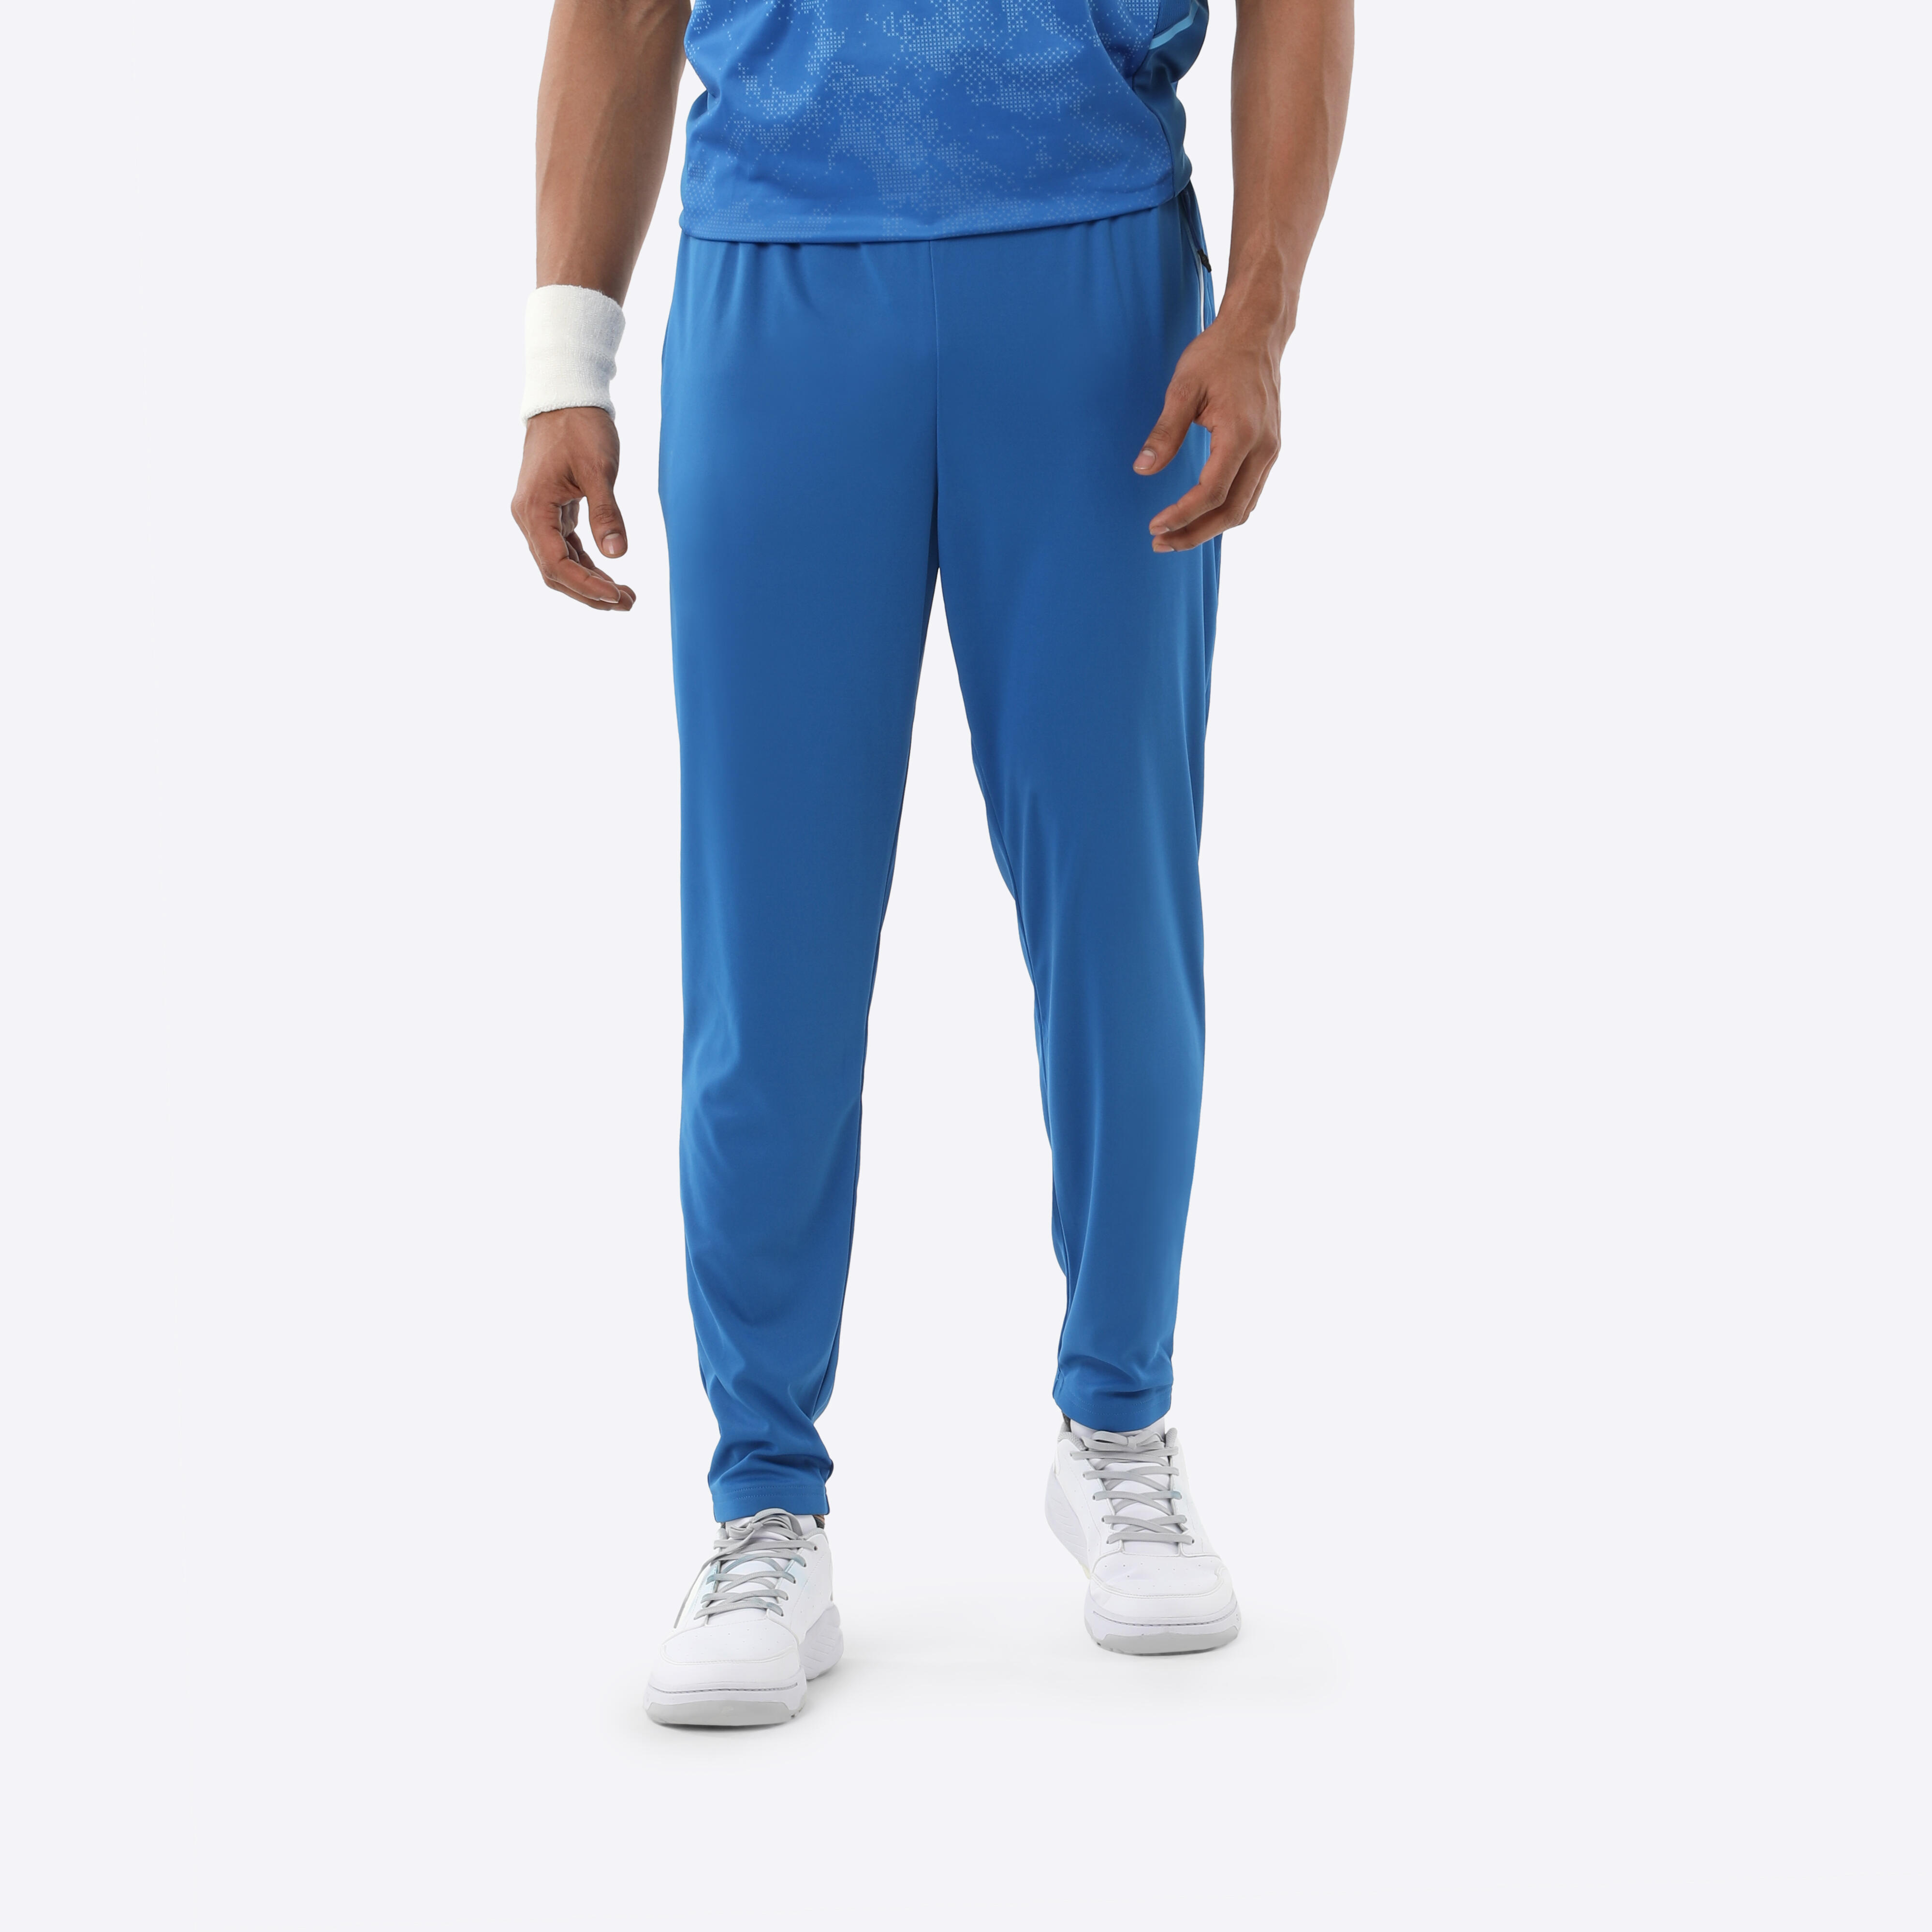 Adidas Baggy Fit Sweatpants Track Pants Size XL Unisex in Blue Colourway -  Etsy India